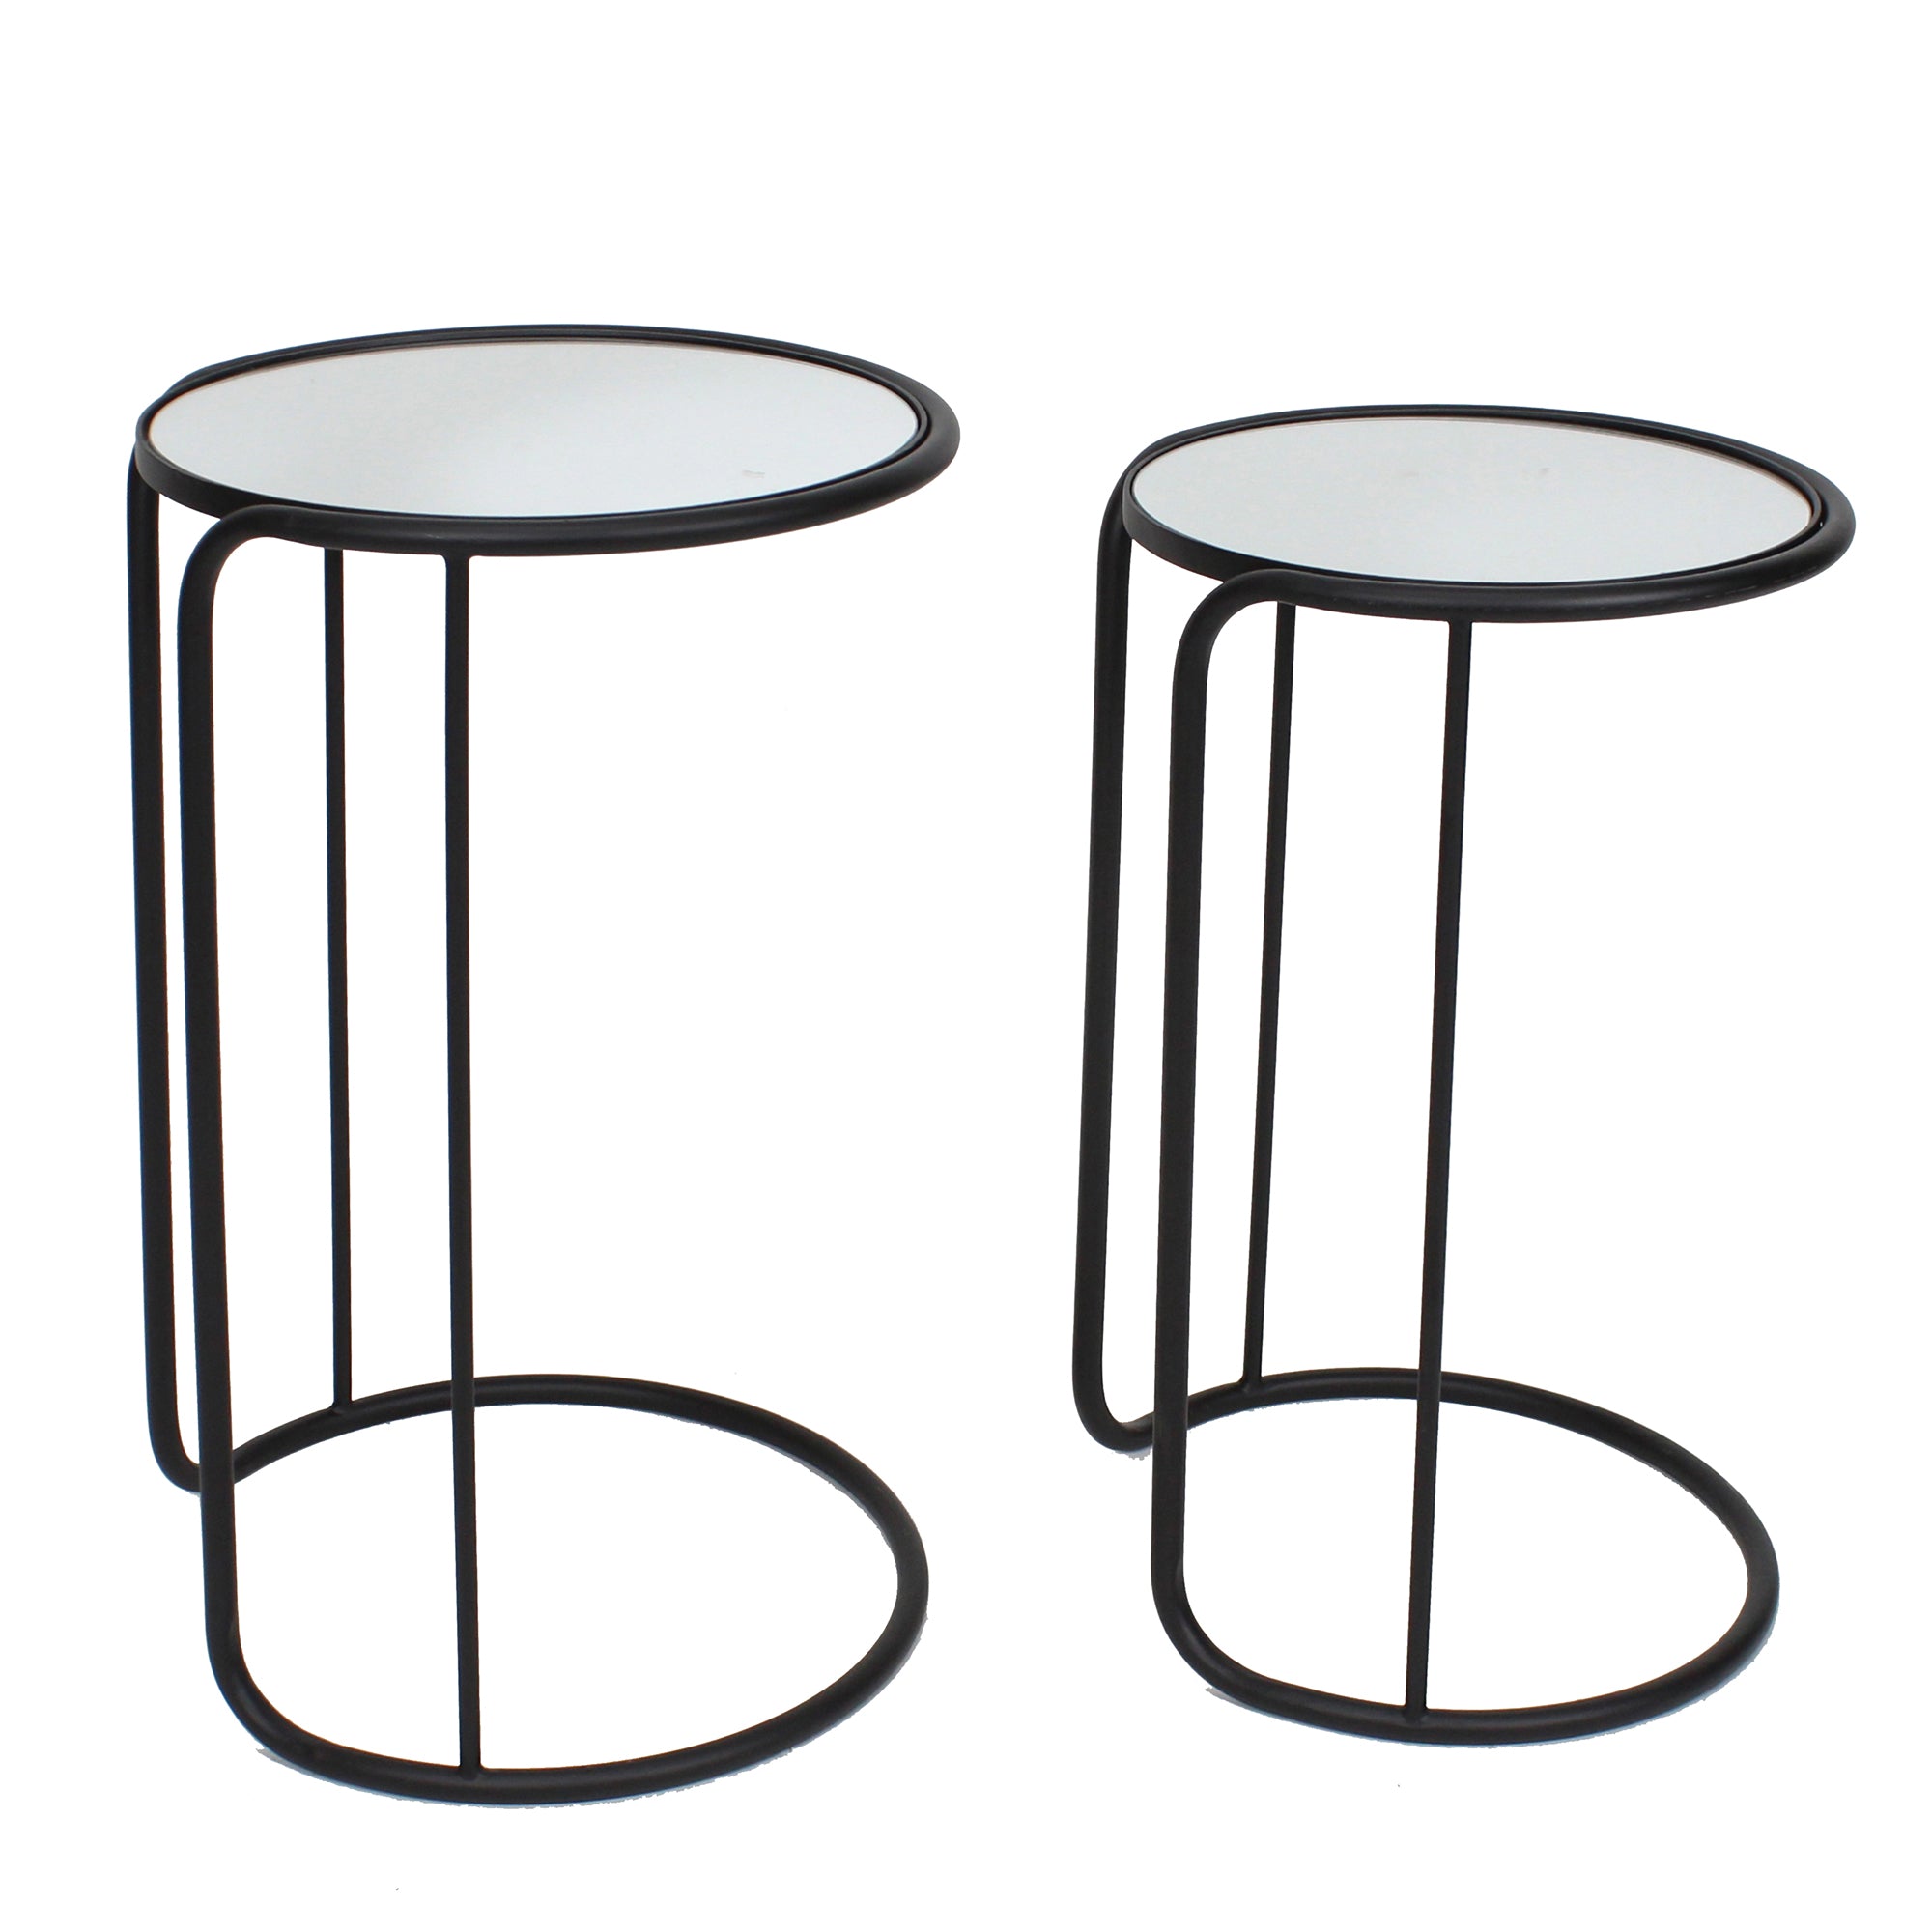 S/2 Metal/Mirror 23/25" Accent Tables, Black